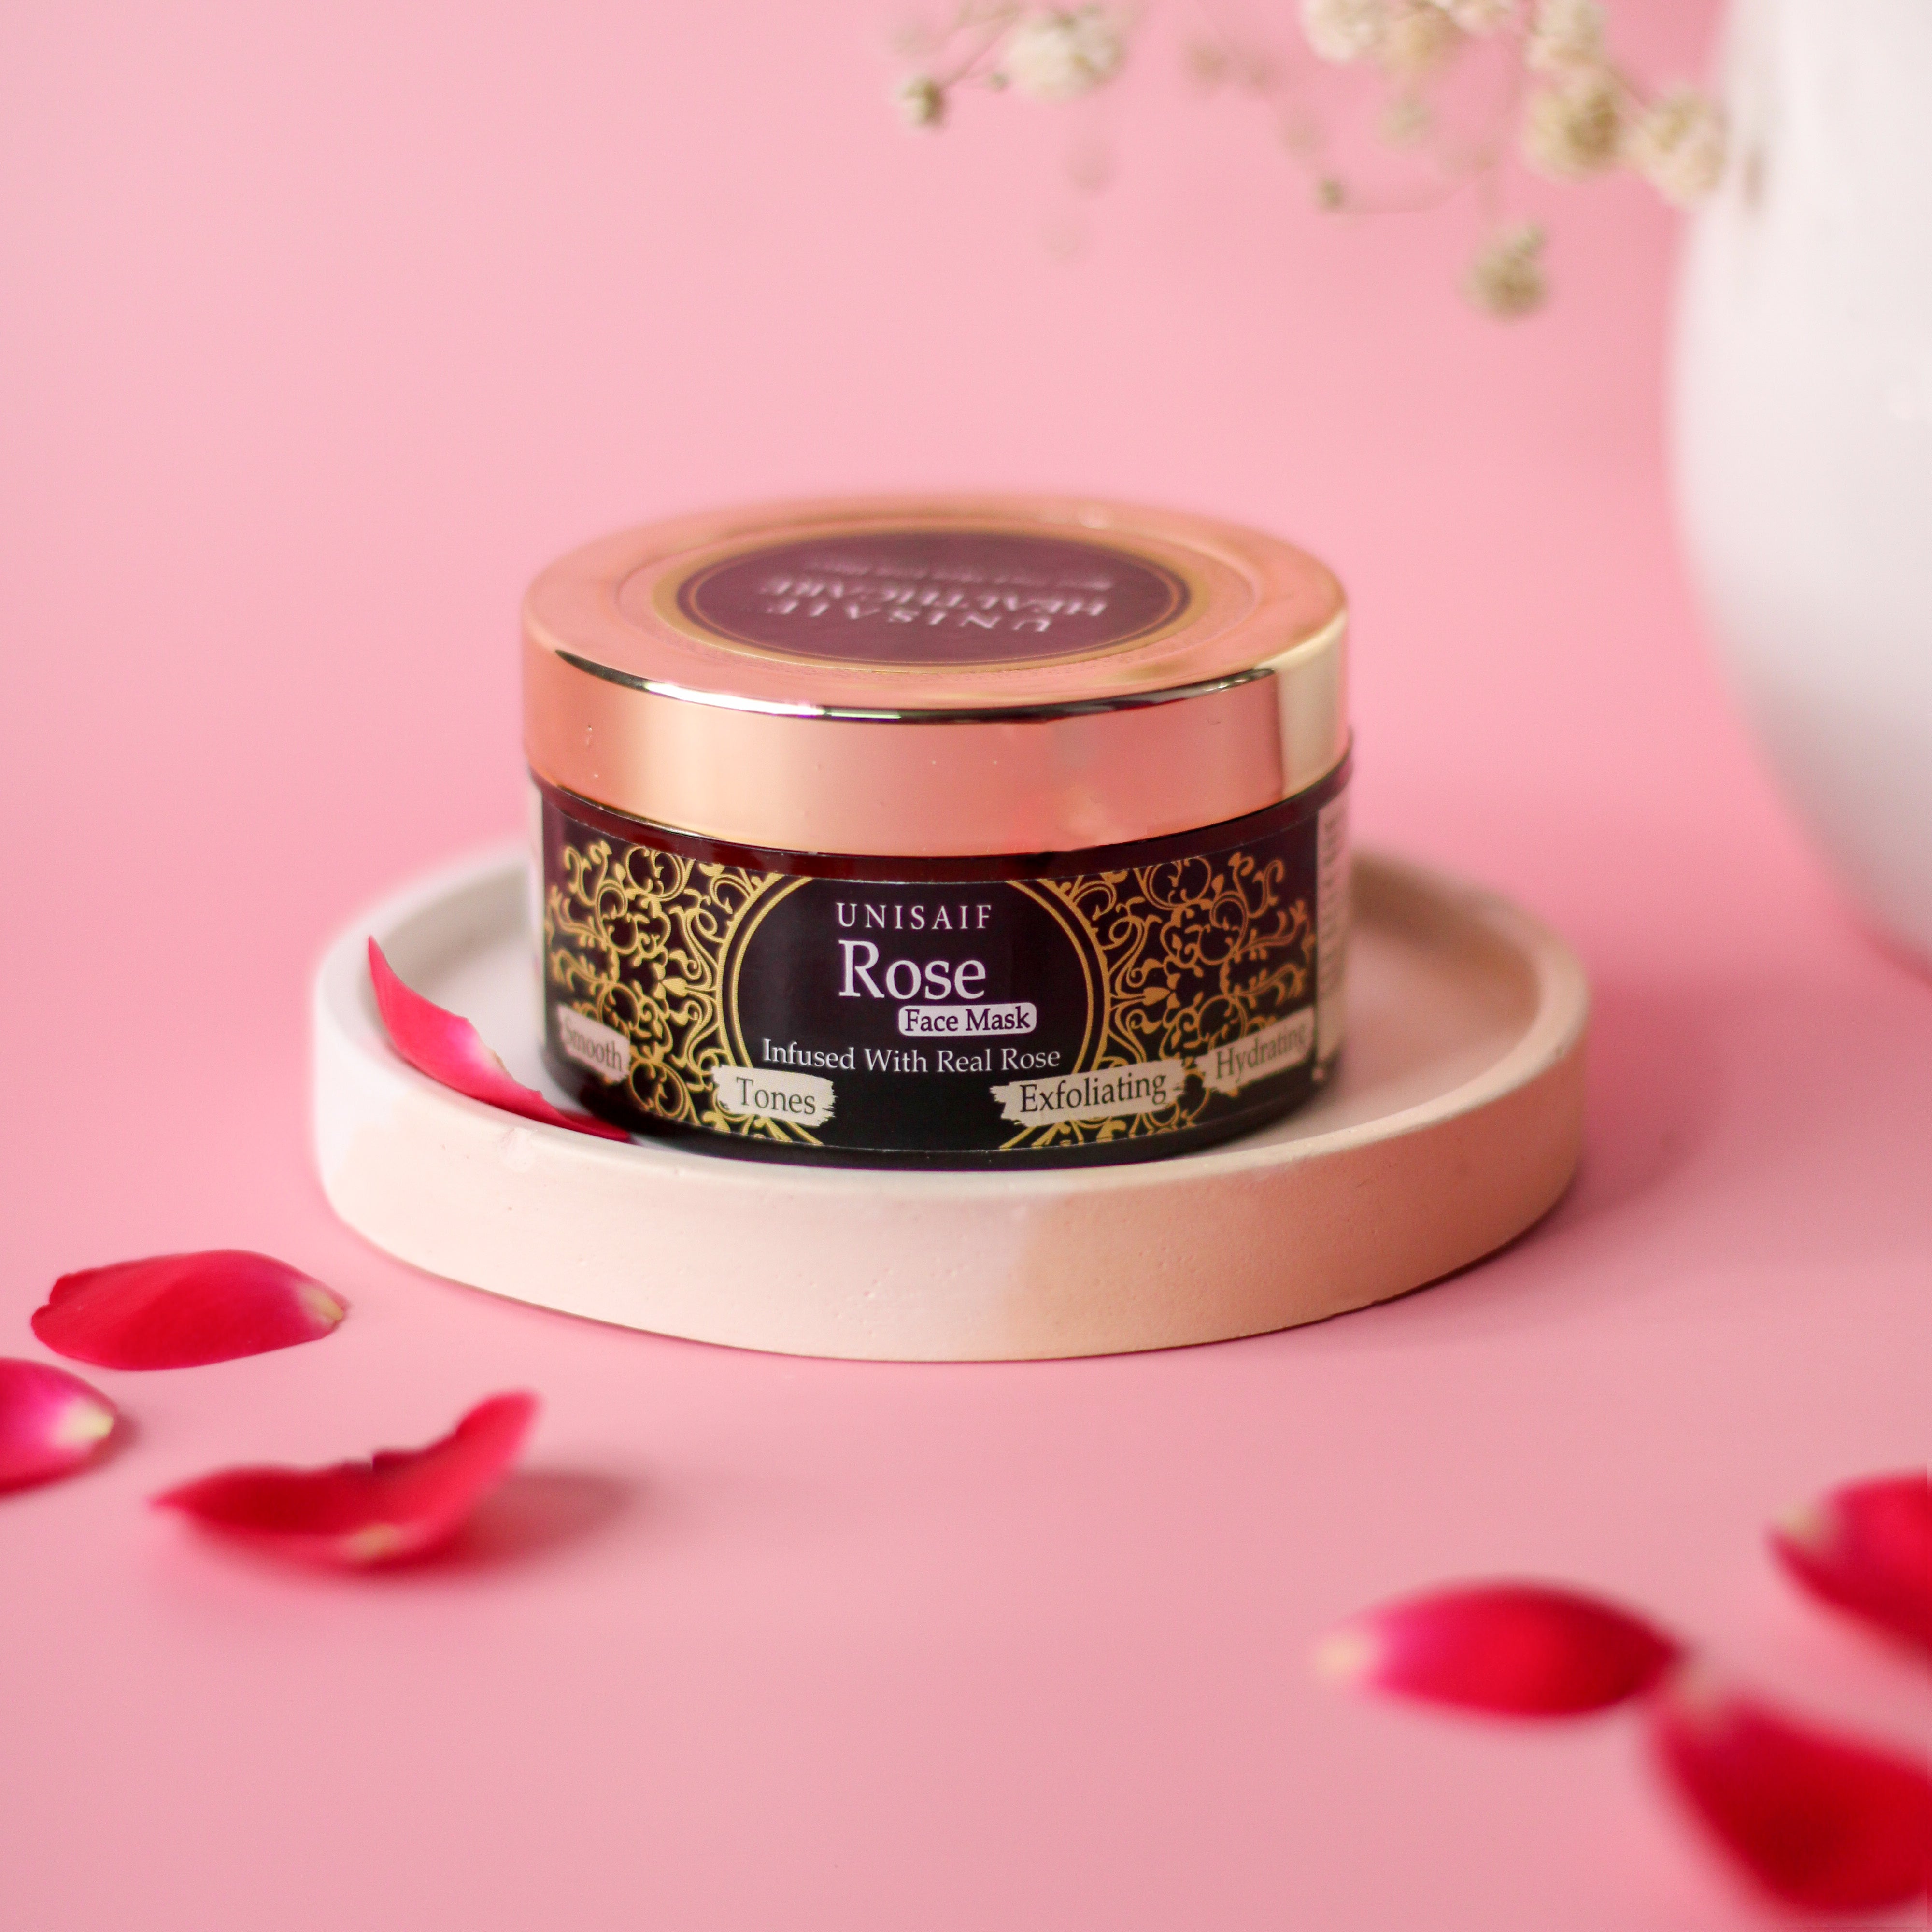 Rose Organic Face Mask (50g) Infused With Multani Mitti & Real Rose |Hydration |Gentle Toning |Plumping Effect